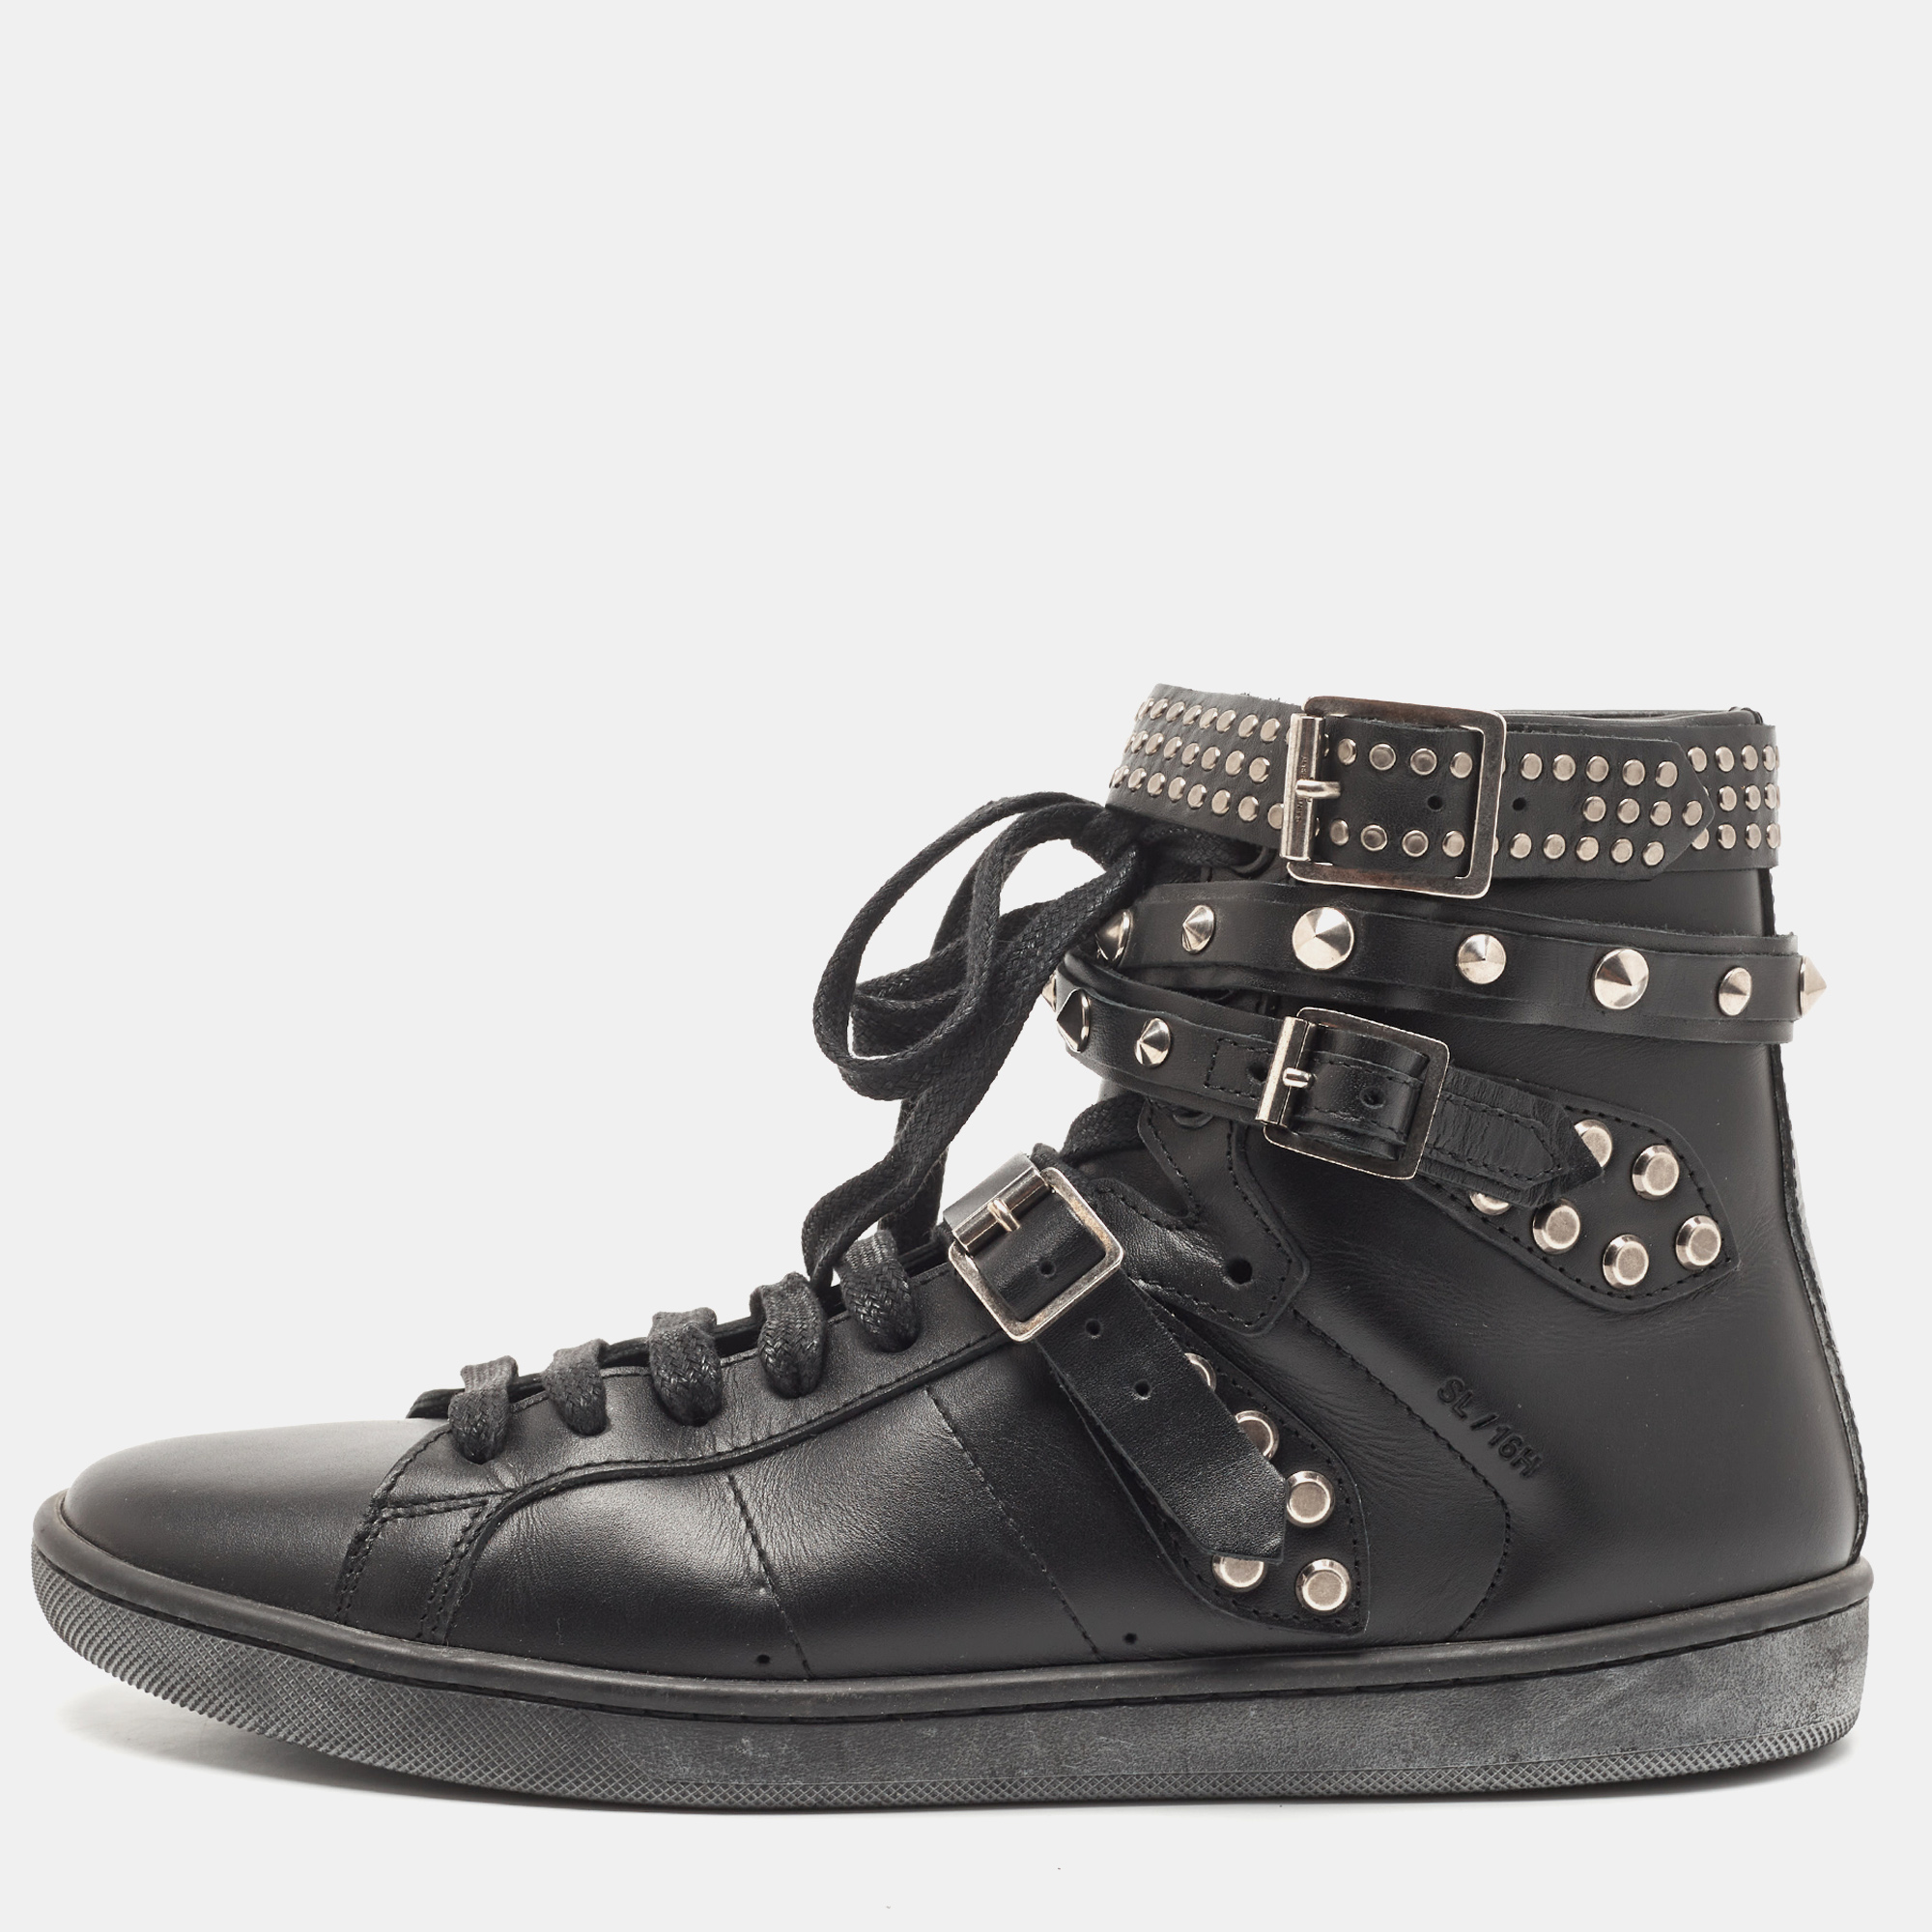 Saint Laurent Black Leather Studded High Top Sneakers Size 38